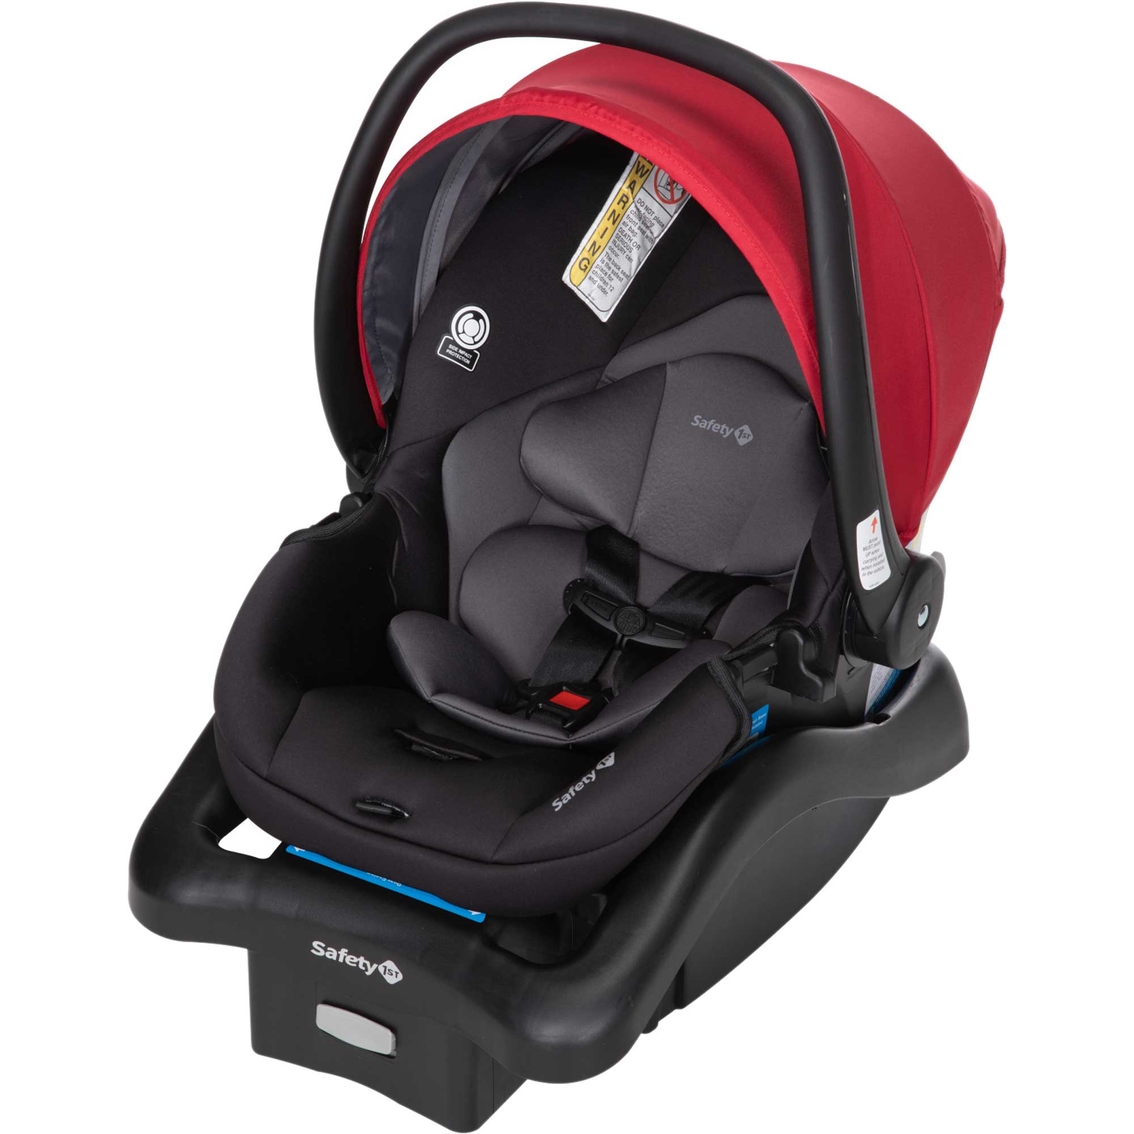 Safety 1st Smooth Ride Travel System Stroller and Infant Car Seat - Image 3 of 10